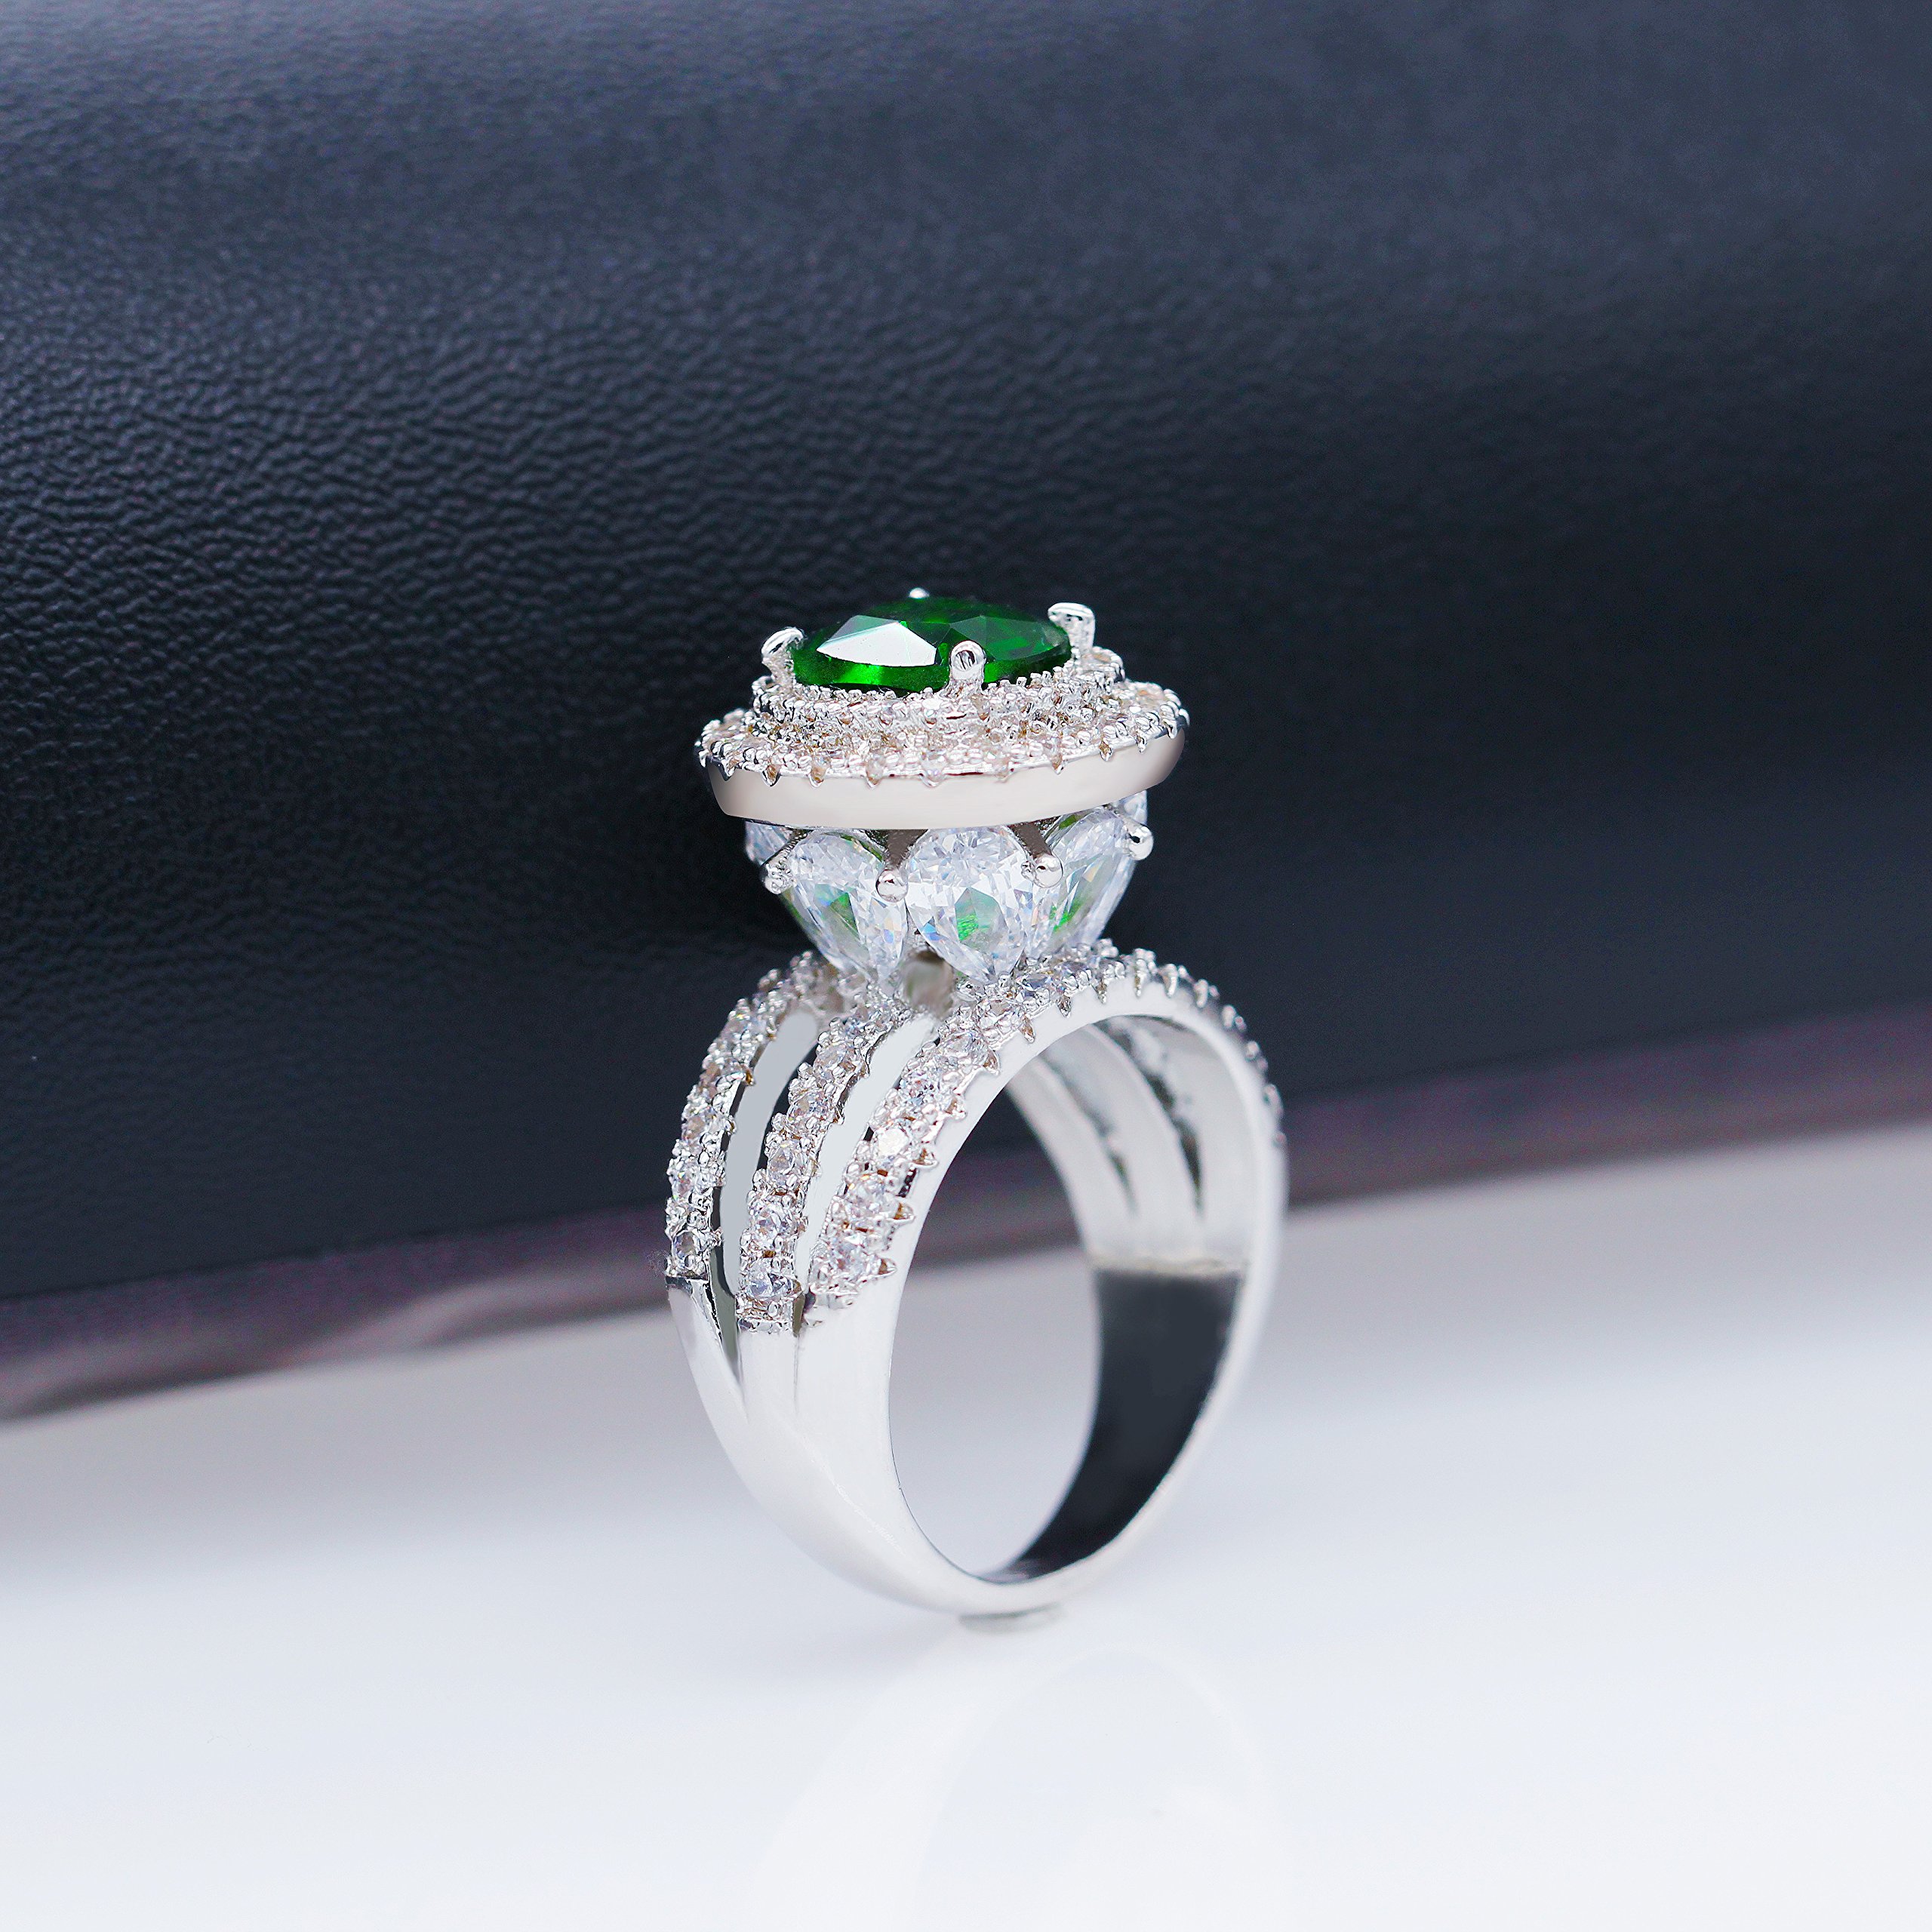 Uloveido Large Simulated Emerald Statement Halo Cocktail Ring with Green Crystal for Women Party Anniversary RJ213